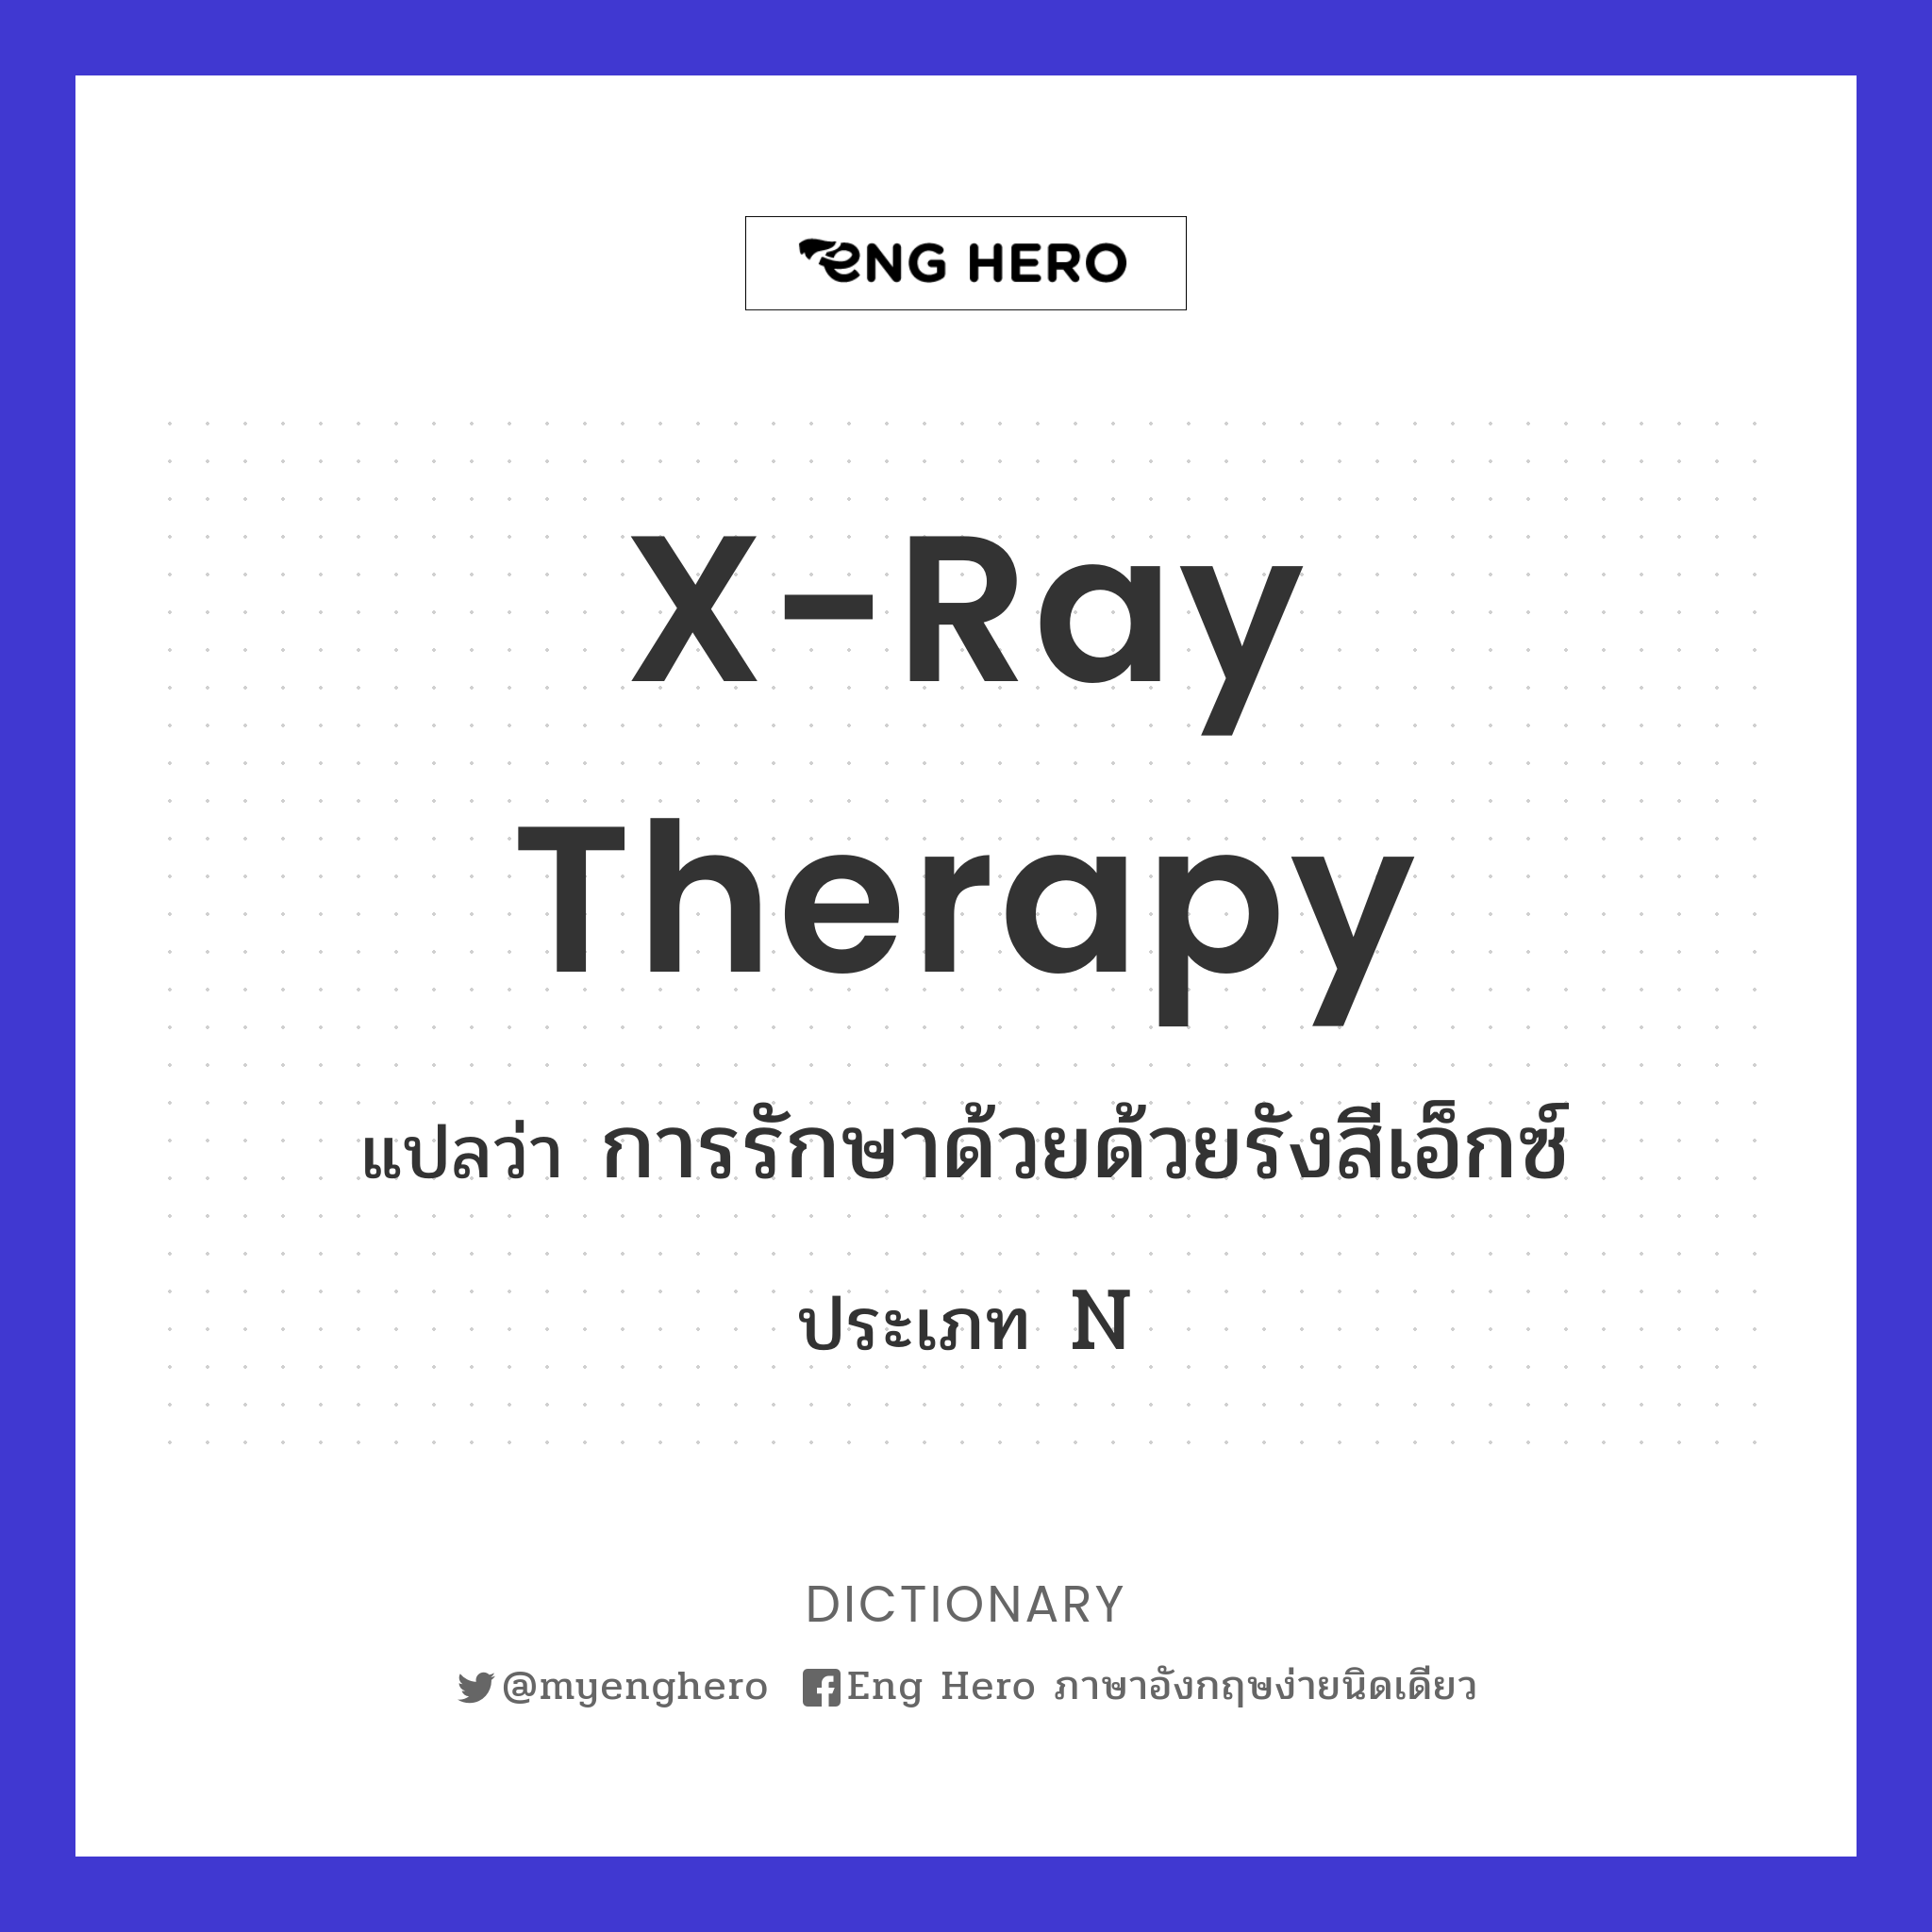 X-ray therapy